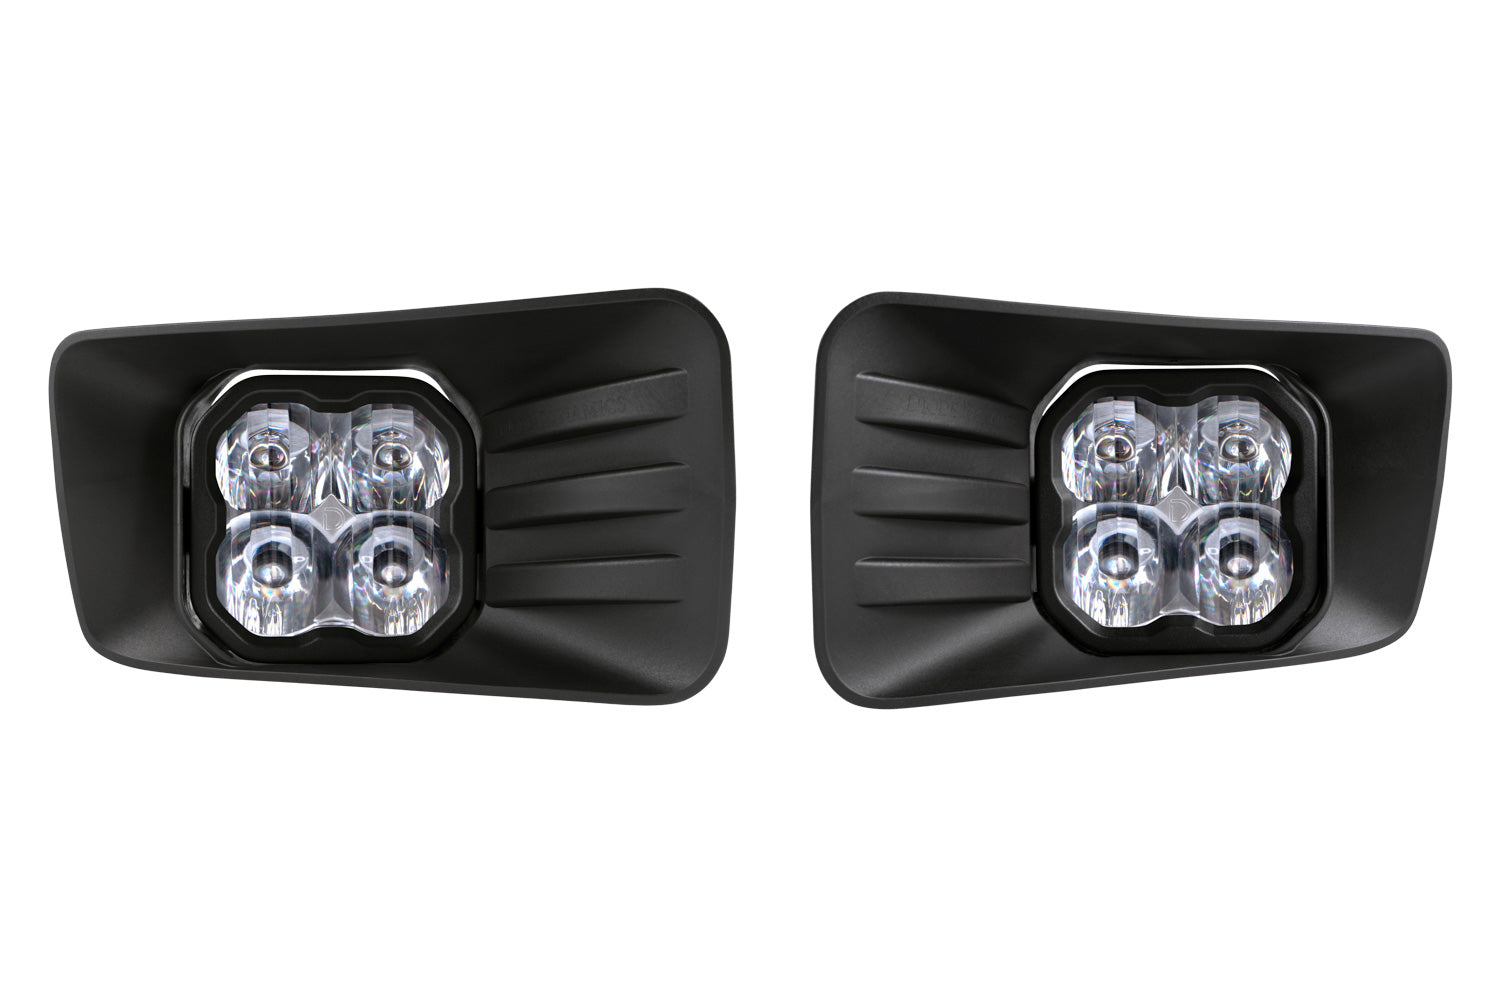 SS3 LED Fog Light Kit for 2007-2015 Chevrolet Silverado, Yellow SAE Fog Pro with Backlight Diode Dynamics